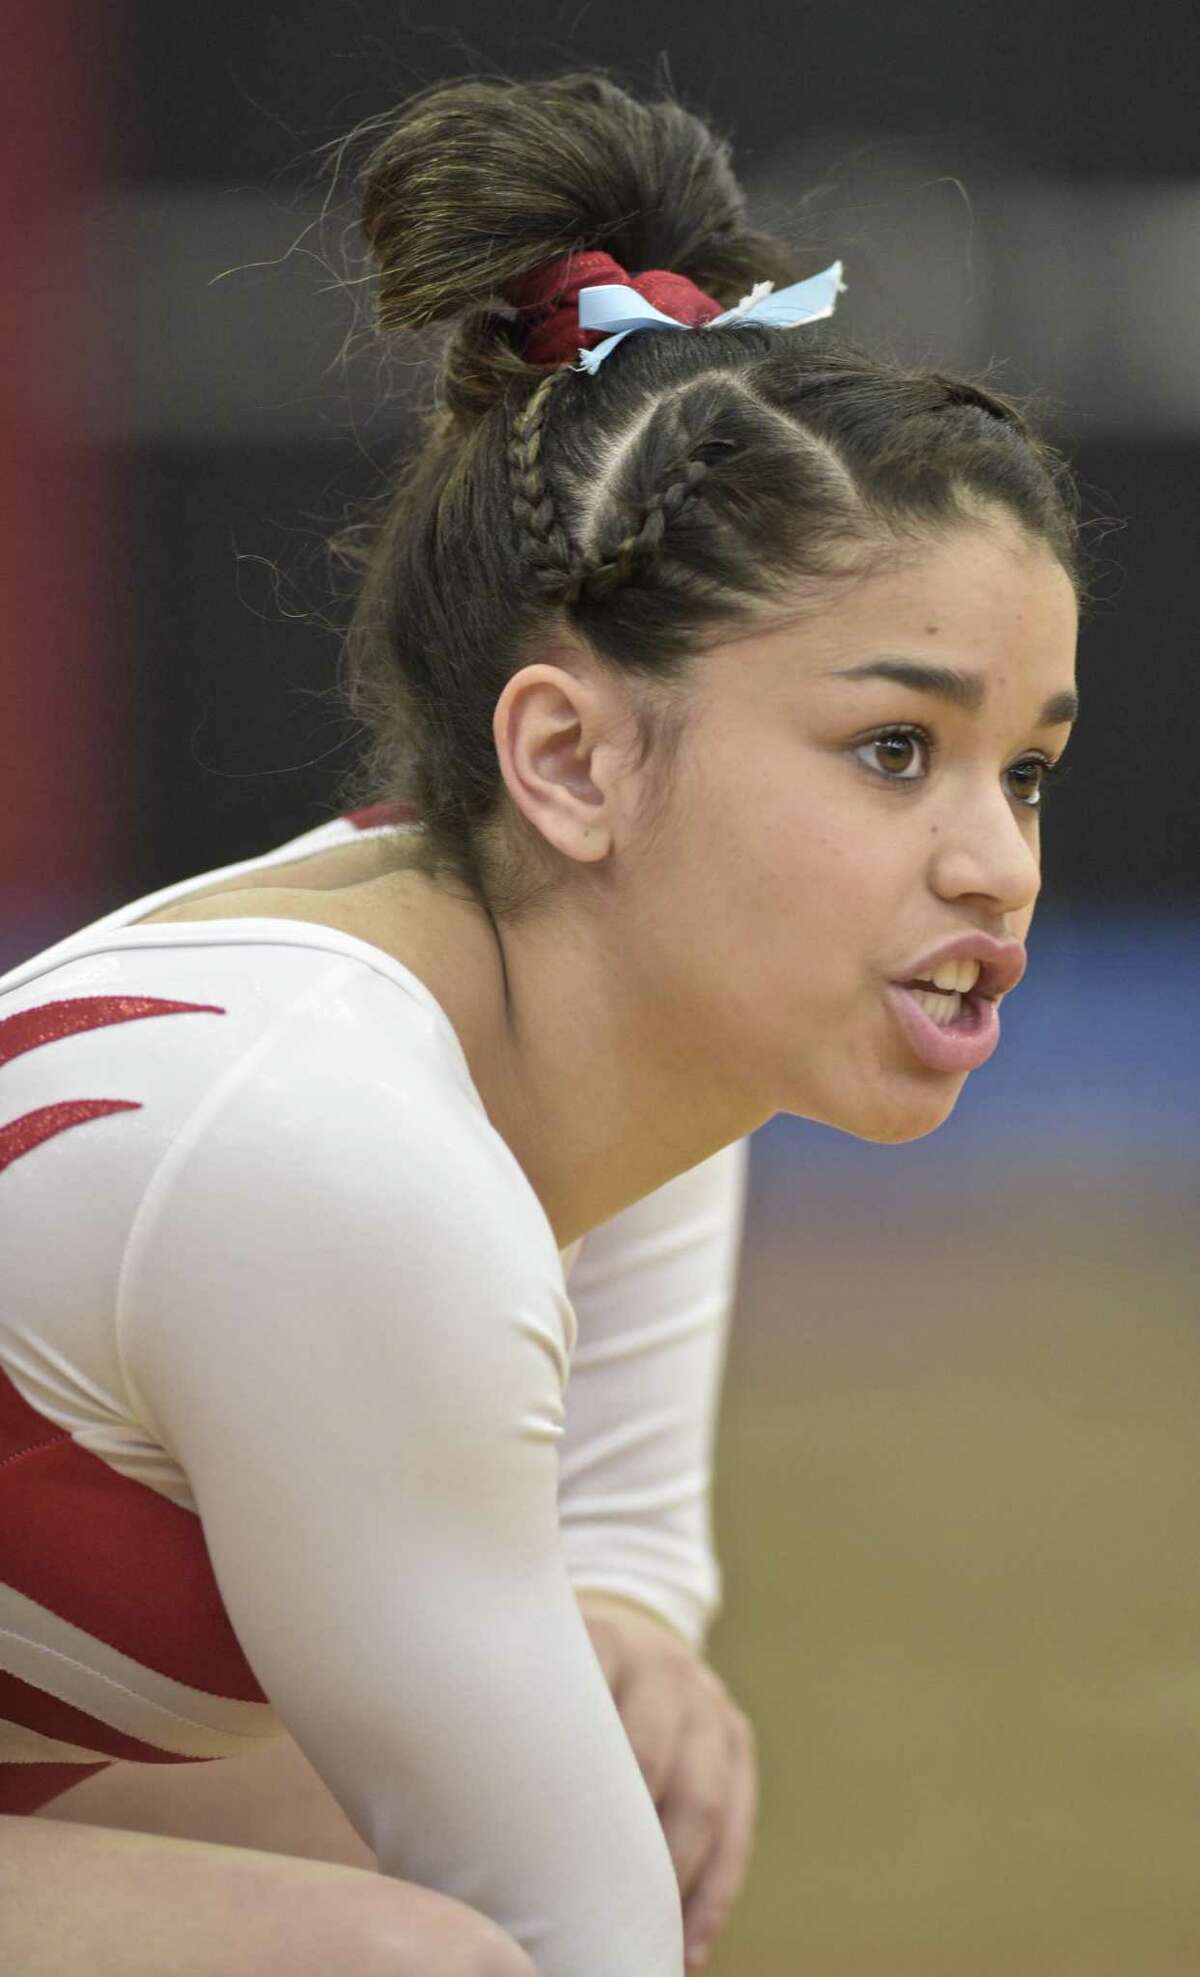 Adnerys De Jesus, Greenwich High School, cheers on a team mate at the Connecticut State Open gymnastics meet, Saturday, March 3, 2018, at Pomperaug High School, in Southbury, Conn.